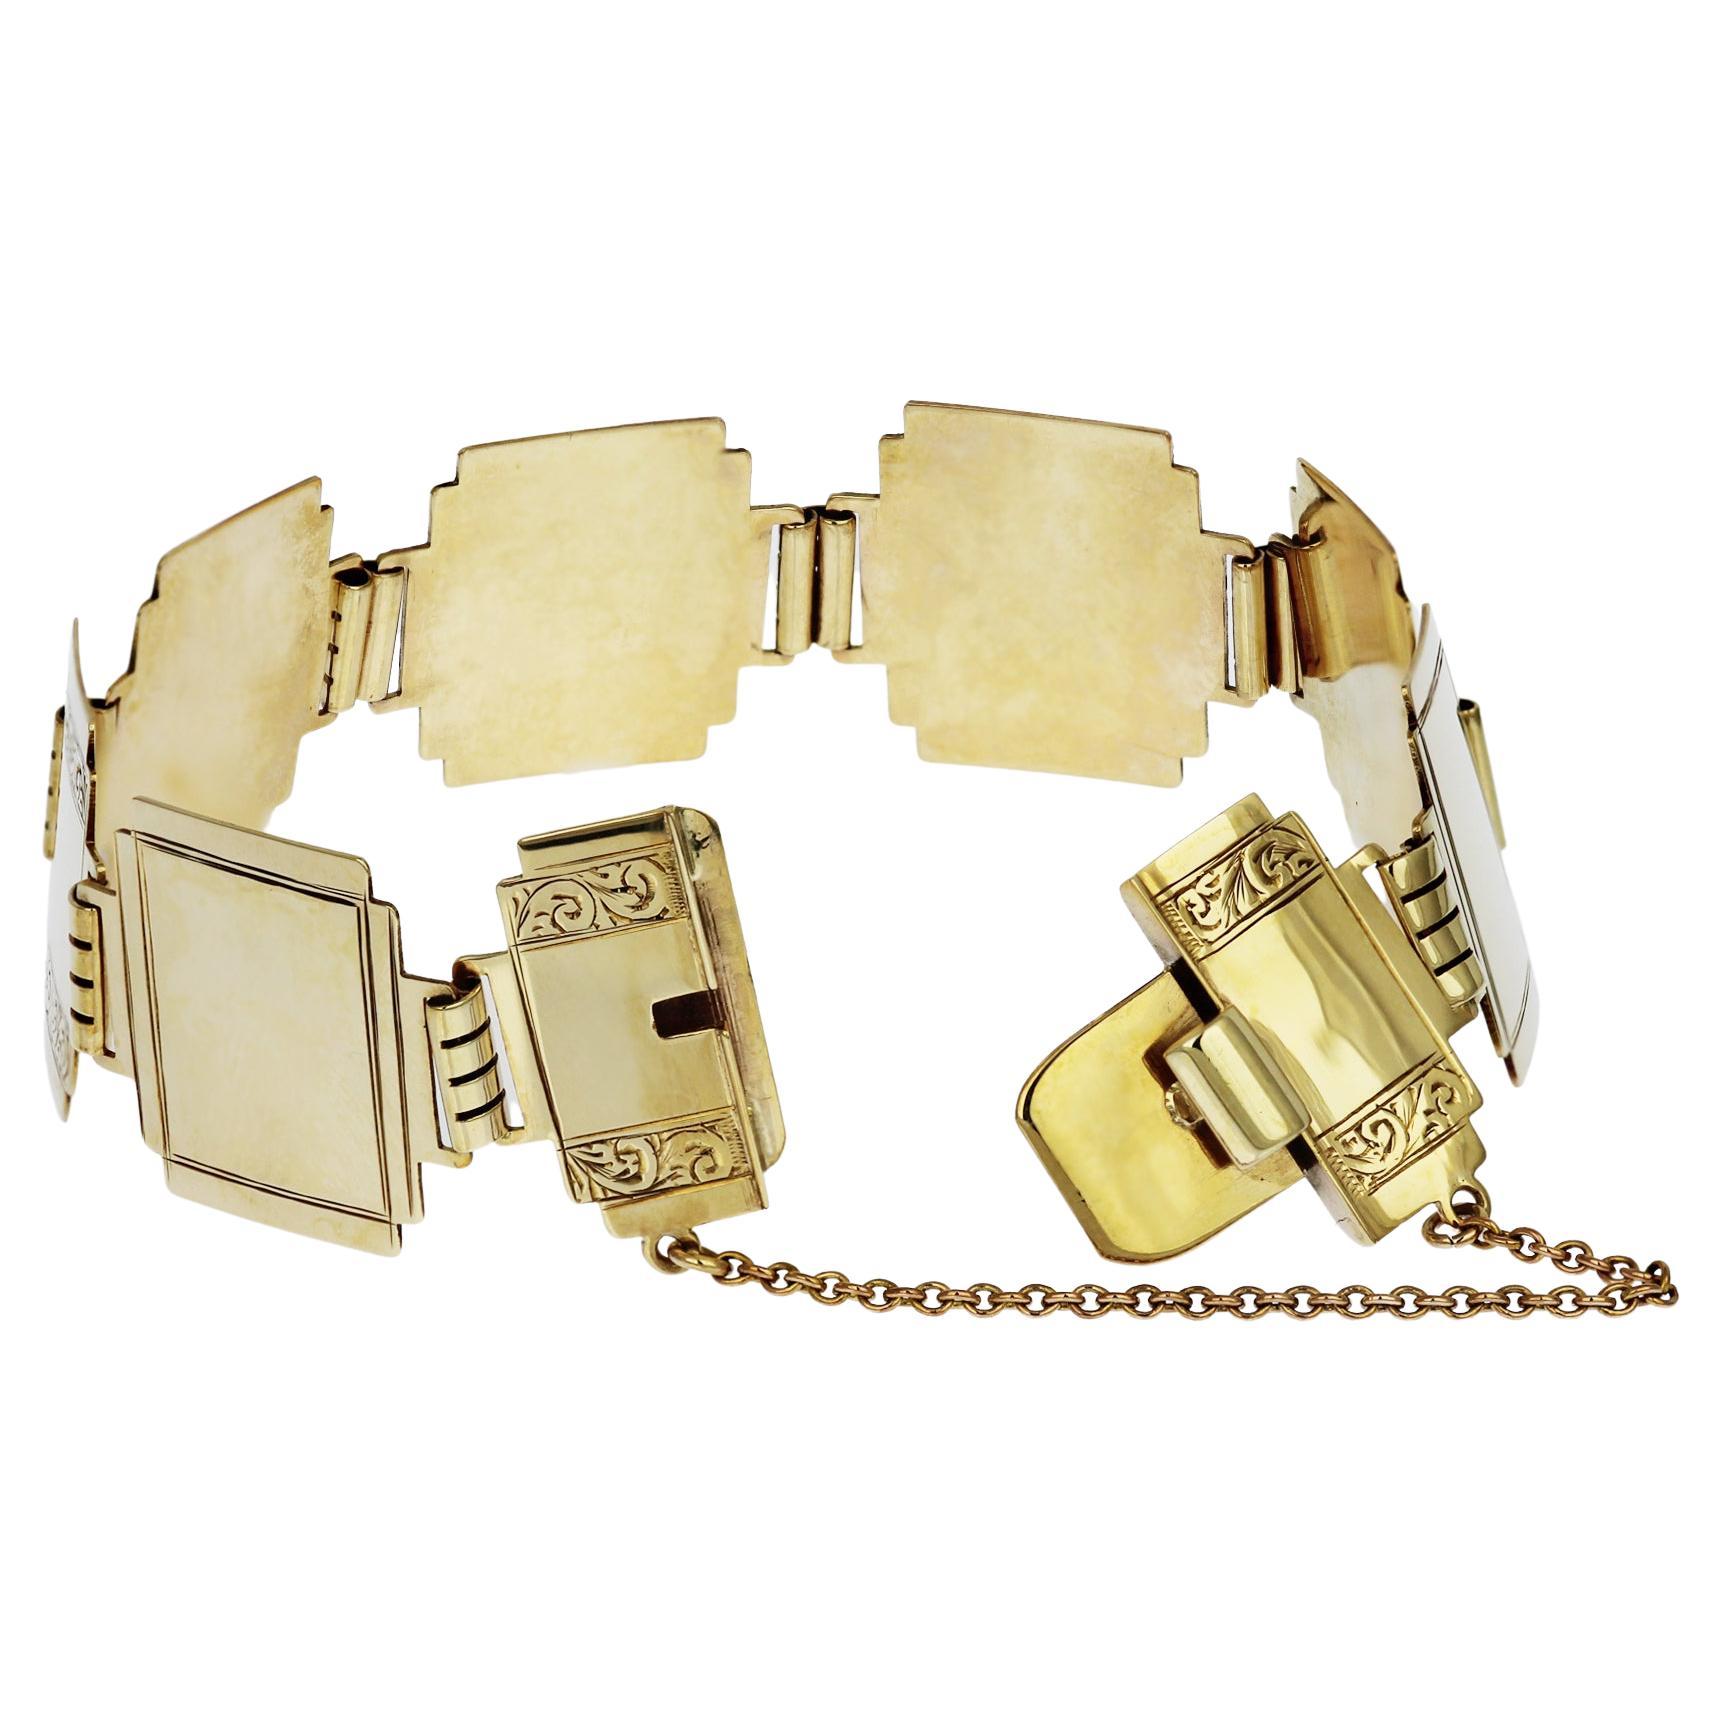 Antique Art Deco 9ct yellow gold bracelet with engraved square segments